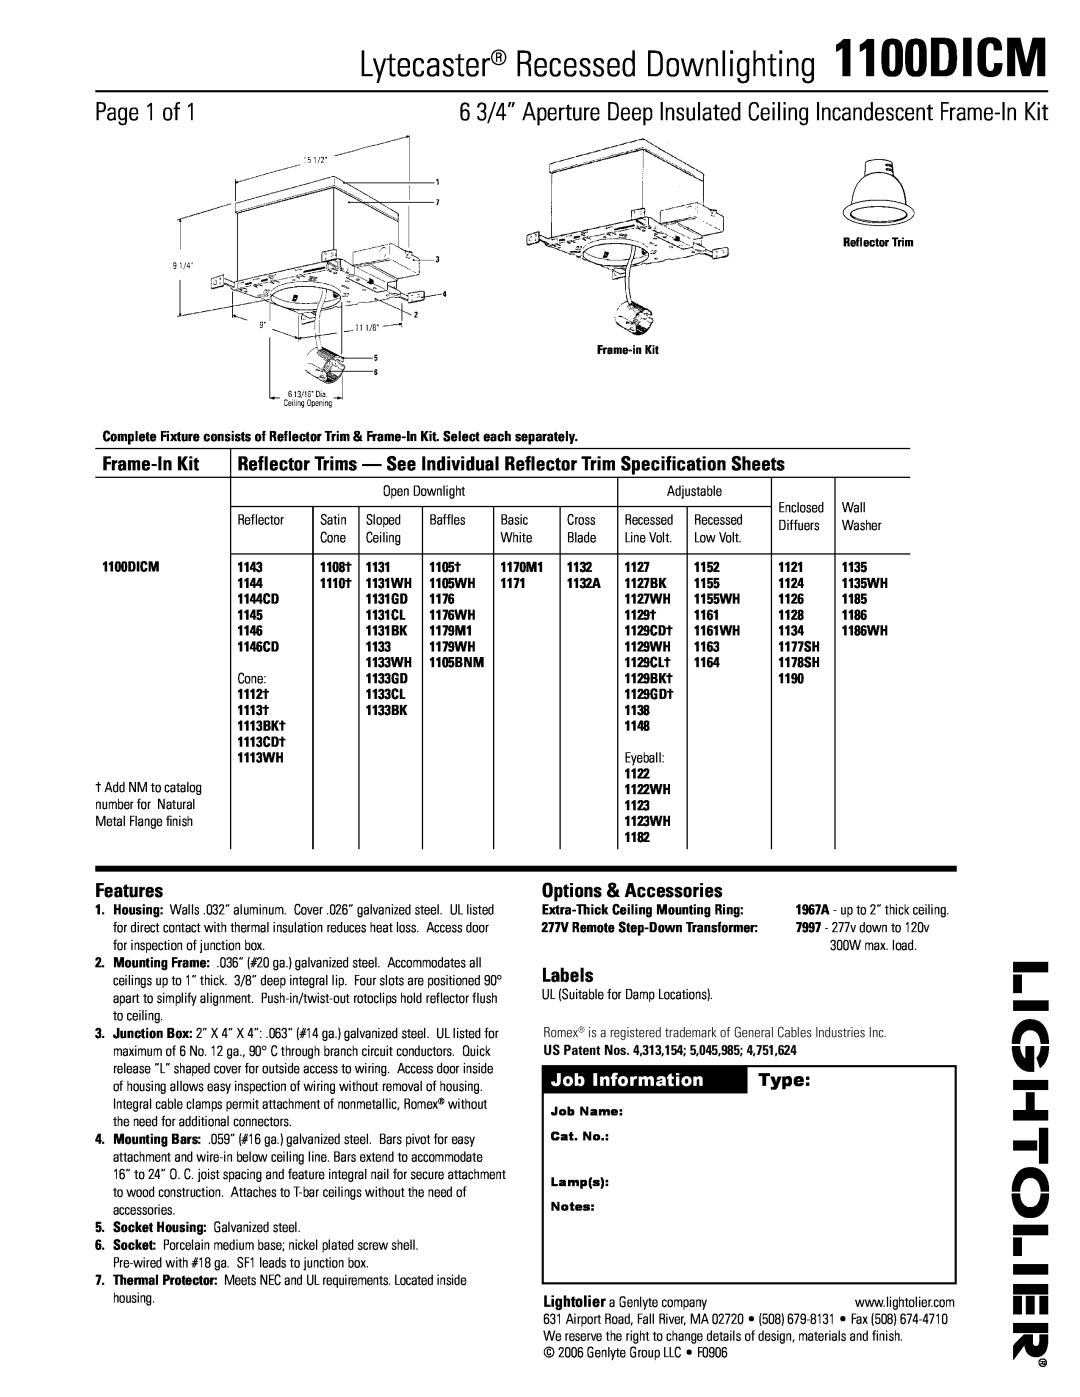 Lightolier specifications Lytecaster Recessed Downlighting 1100DICM, Page  of, Frame-InKit, Features, Labels, Type 